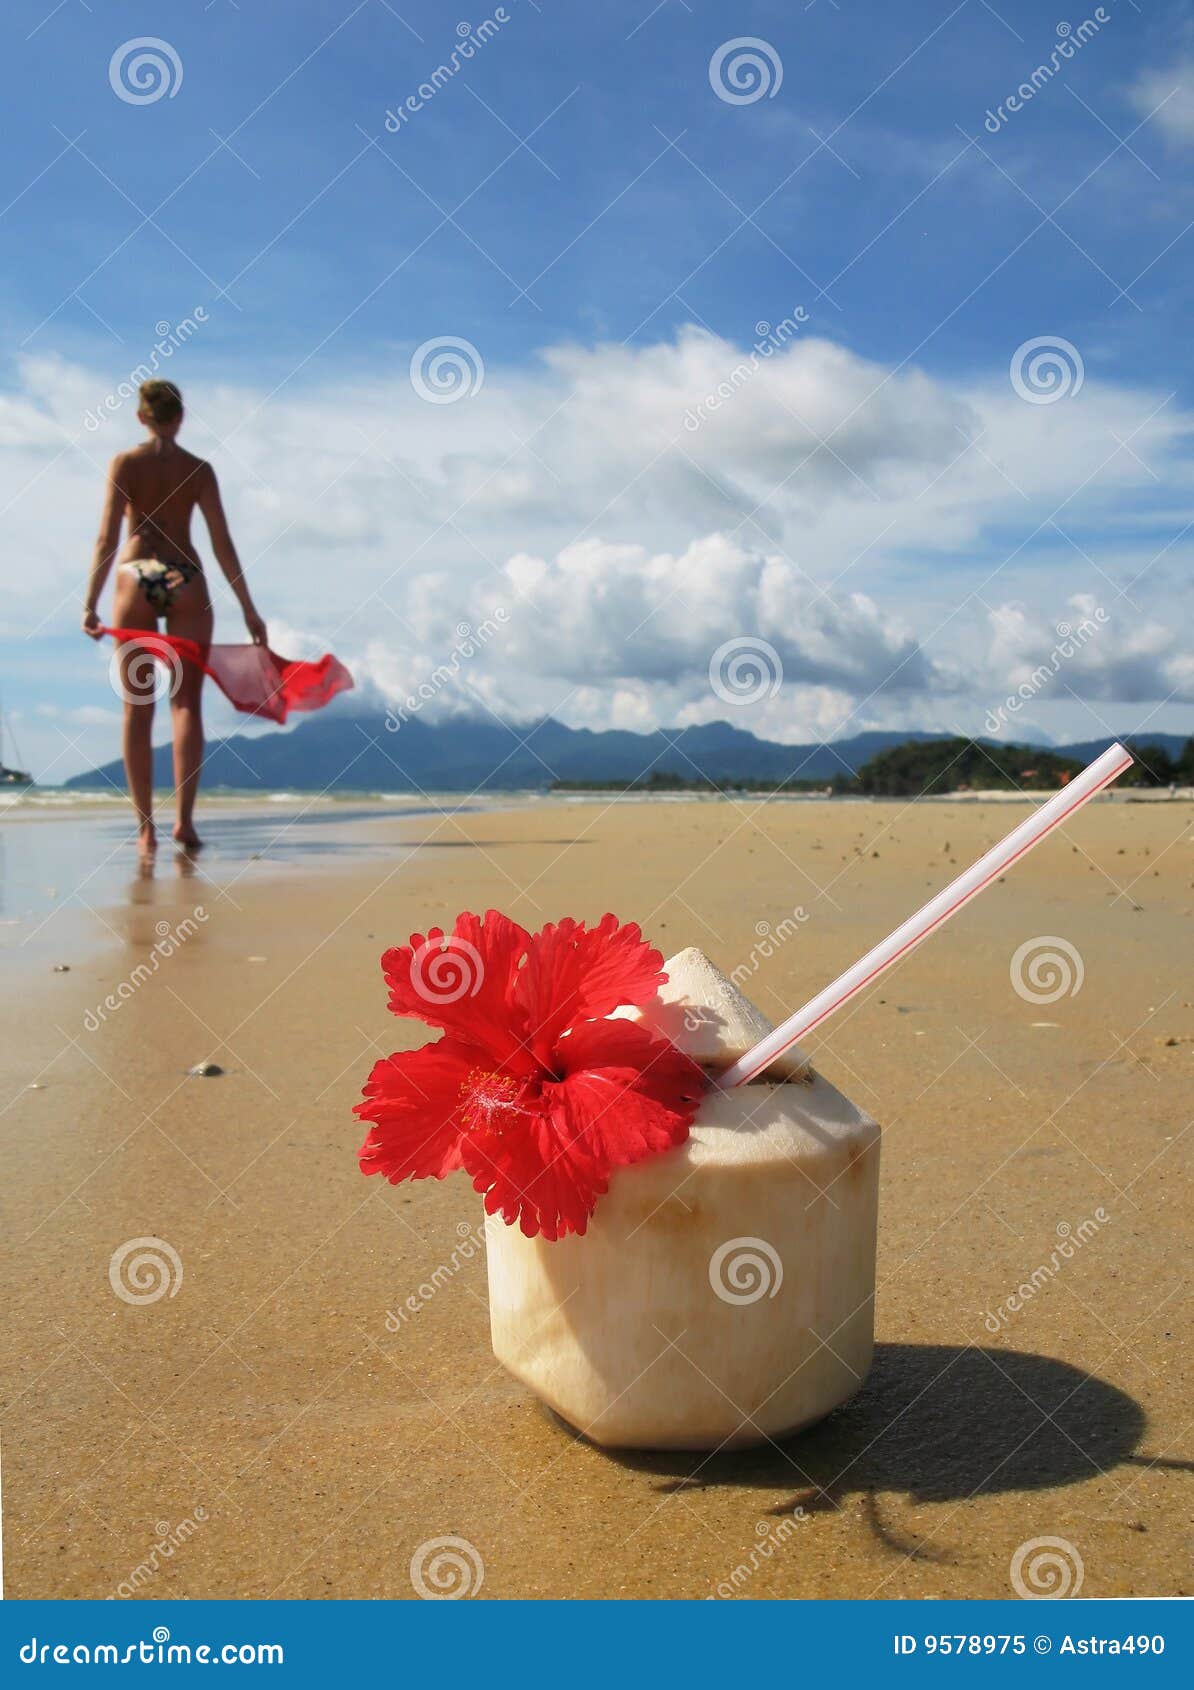 Fast Food Containers and Drink Cups on the Beach with Towels and